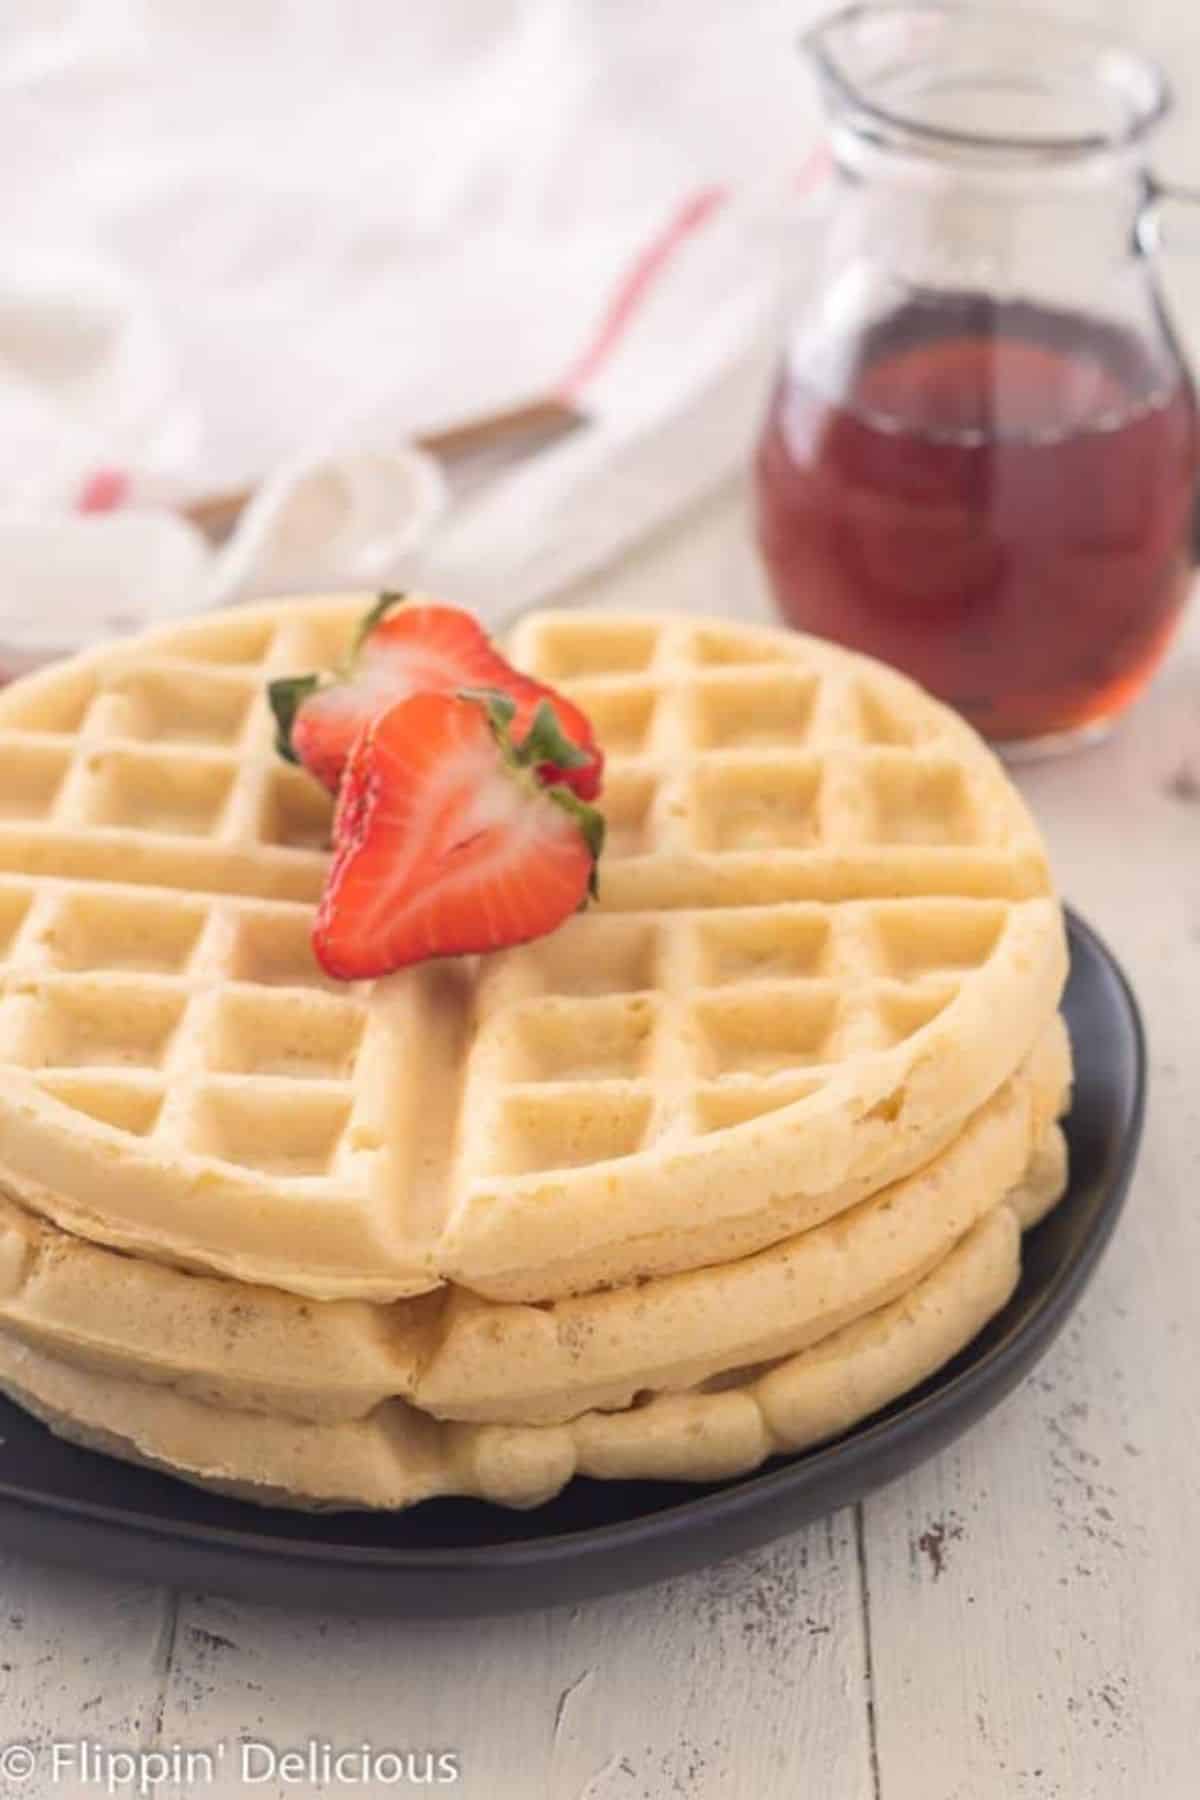 A pile of Gluten-Free Waffles garnished with a sliced strawberry on a black plate.